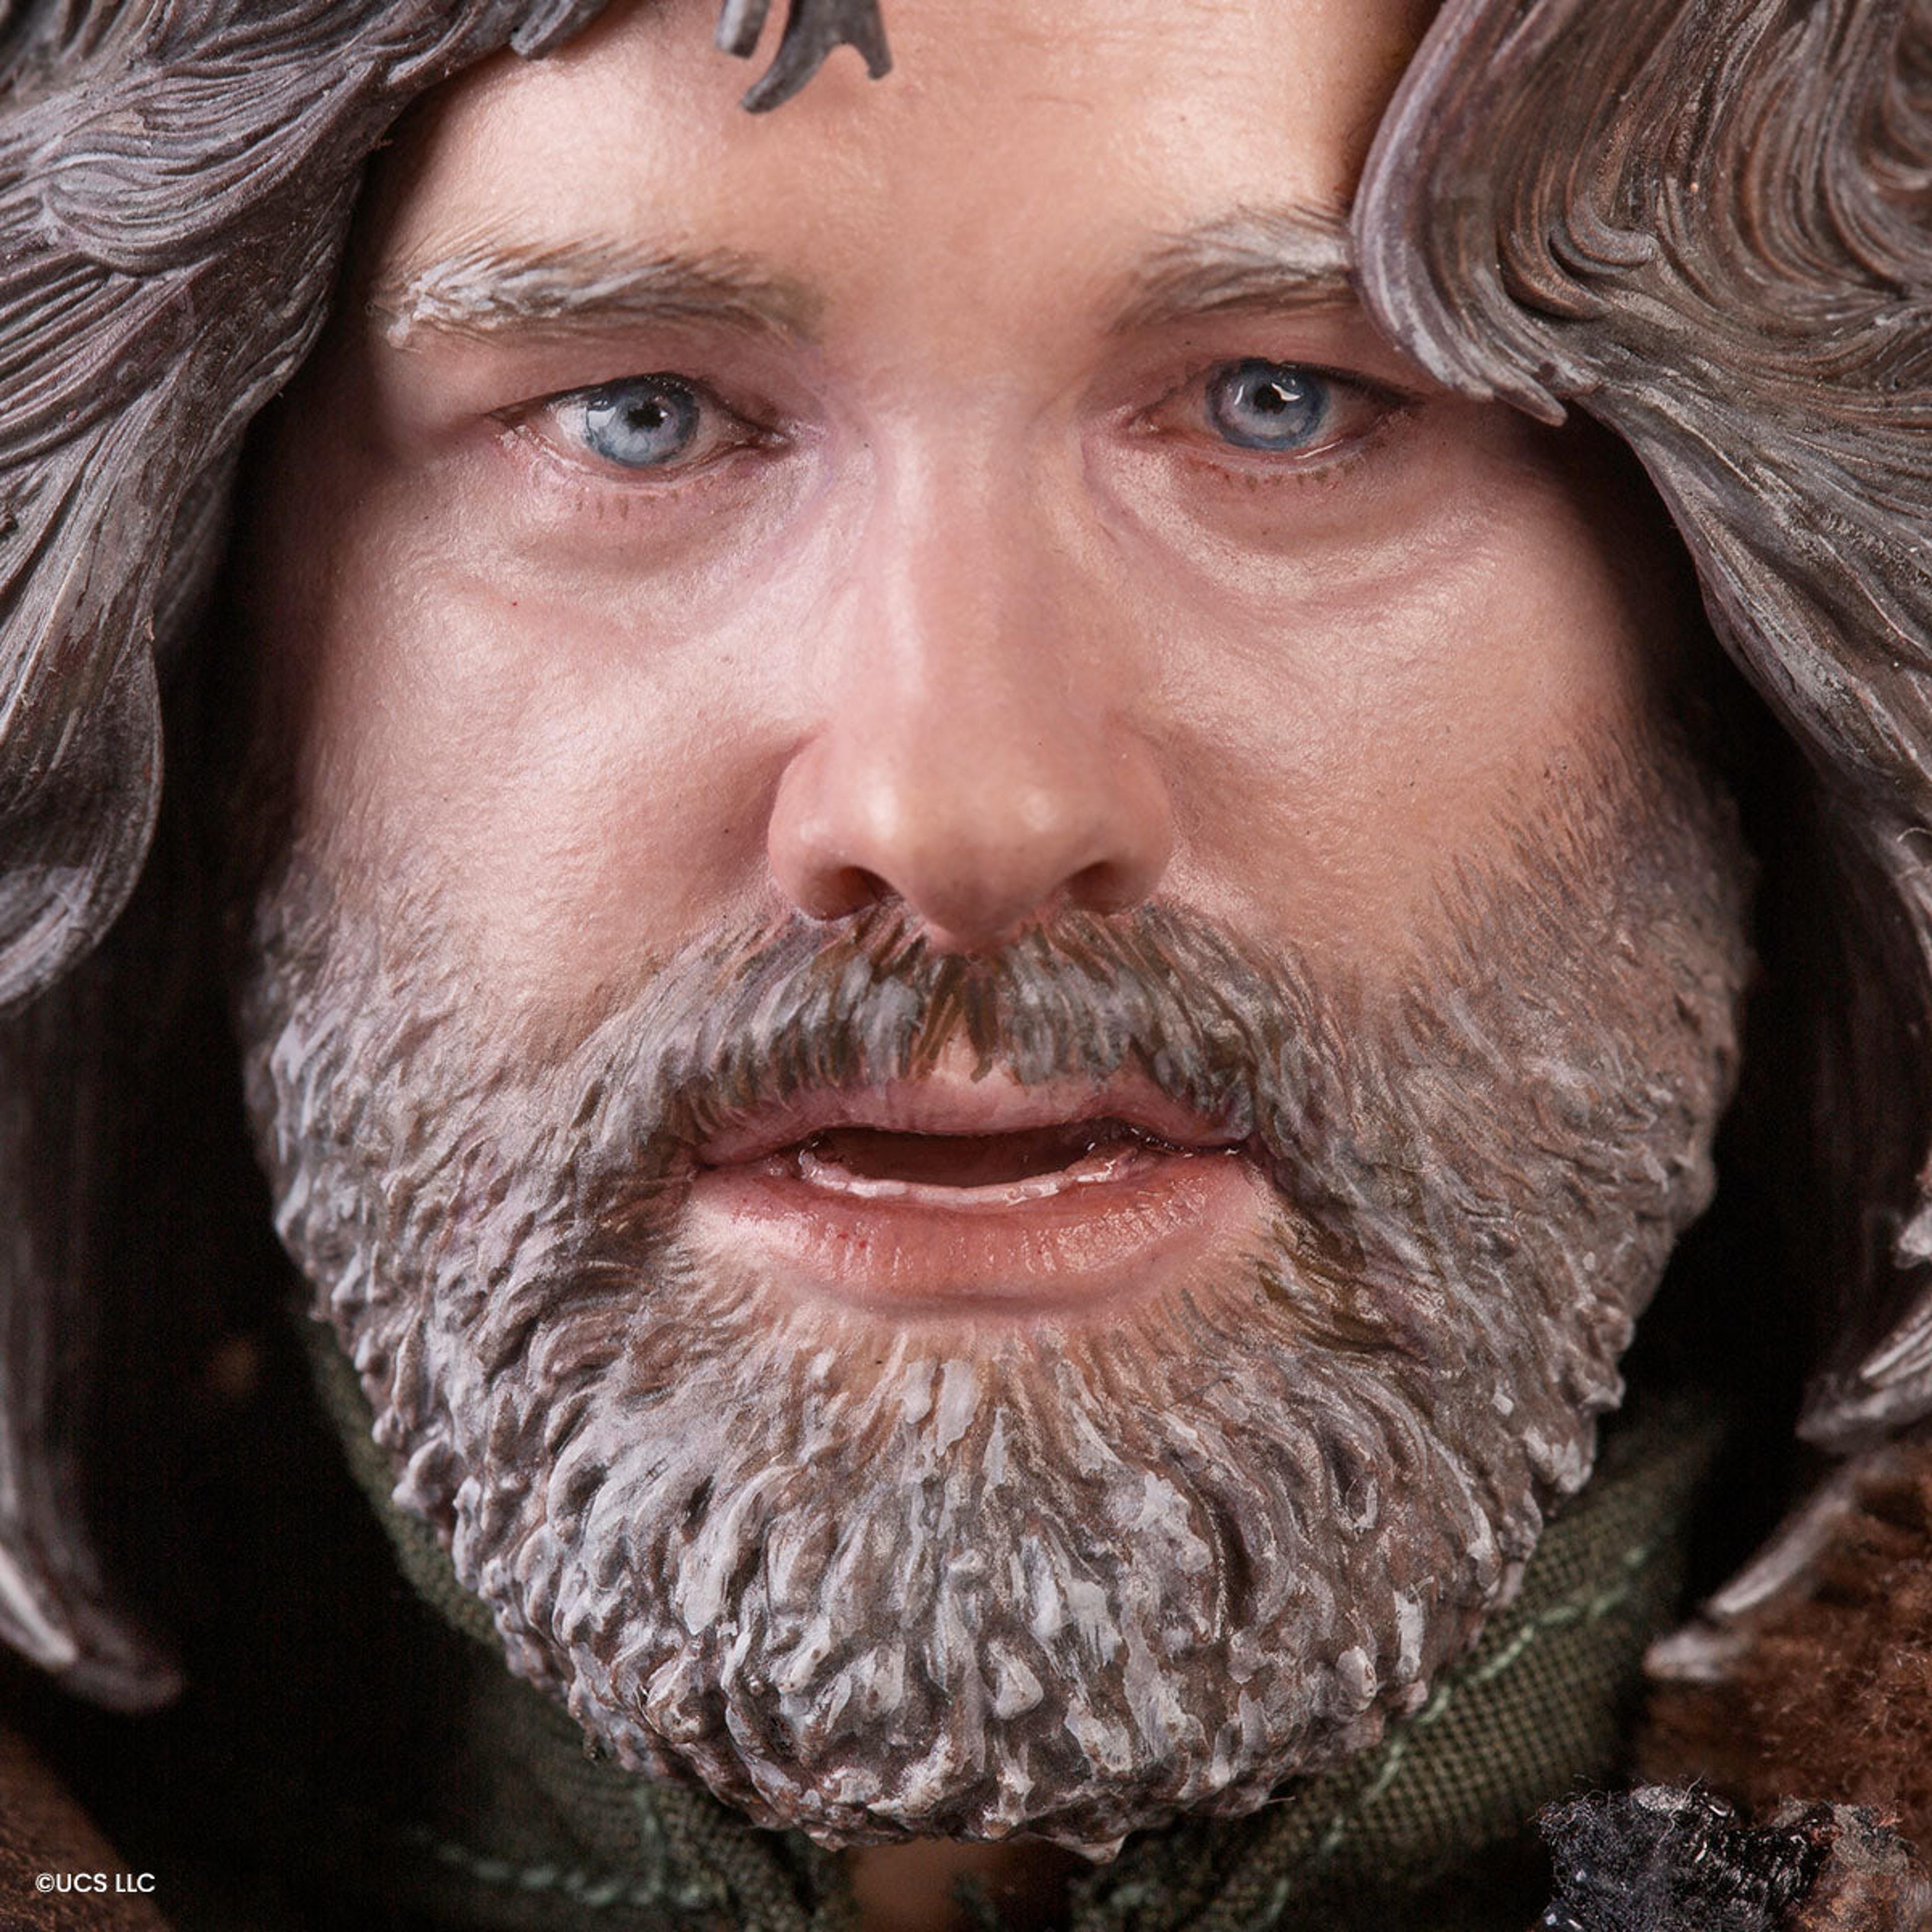 Alternate View 26 of The Thing: MacReady 1/6 Scale Figure